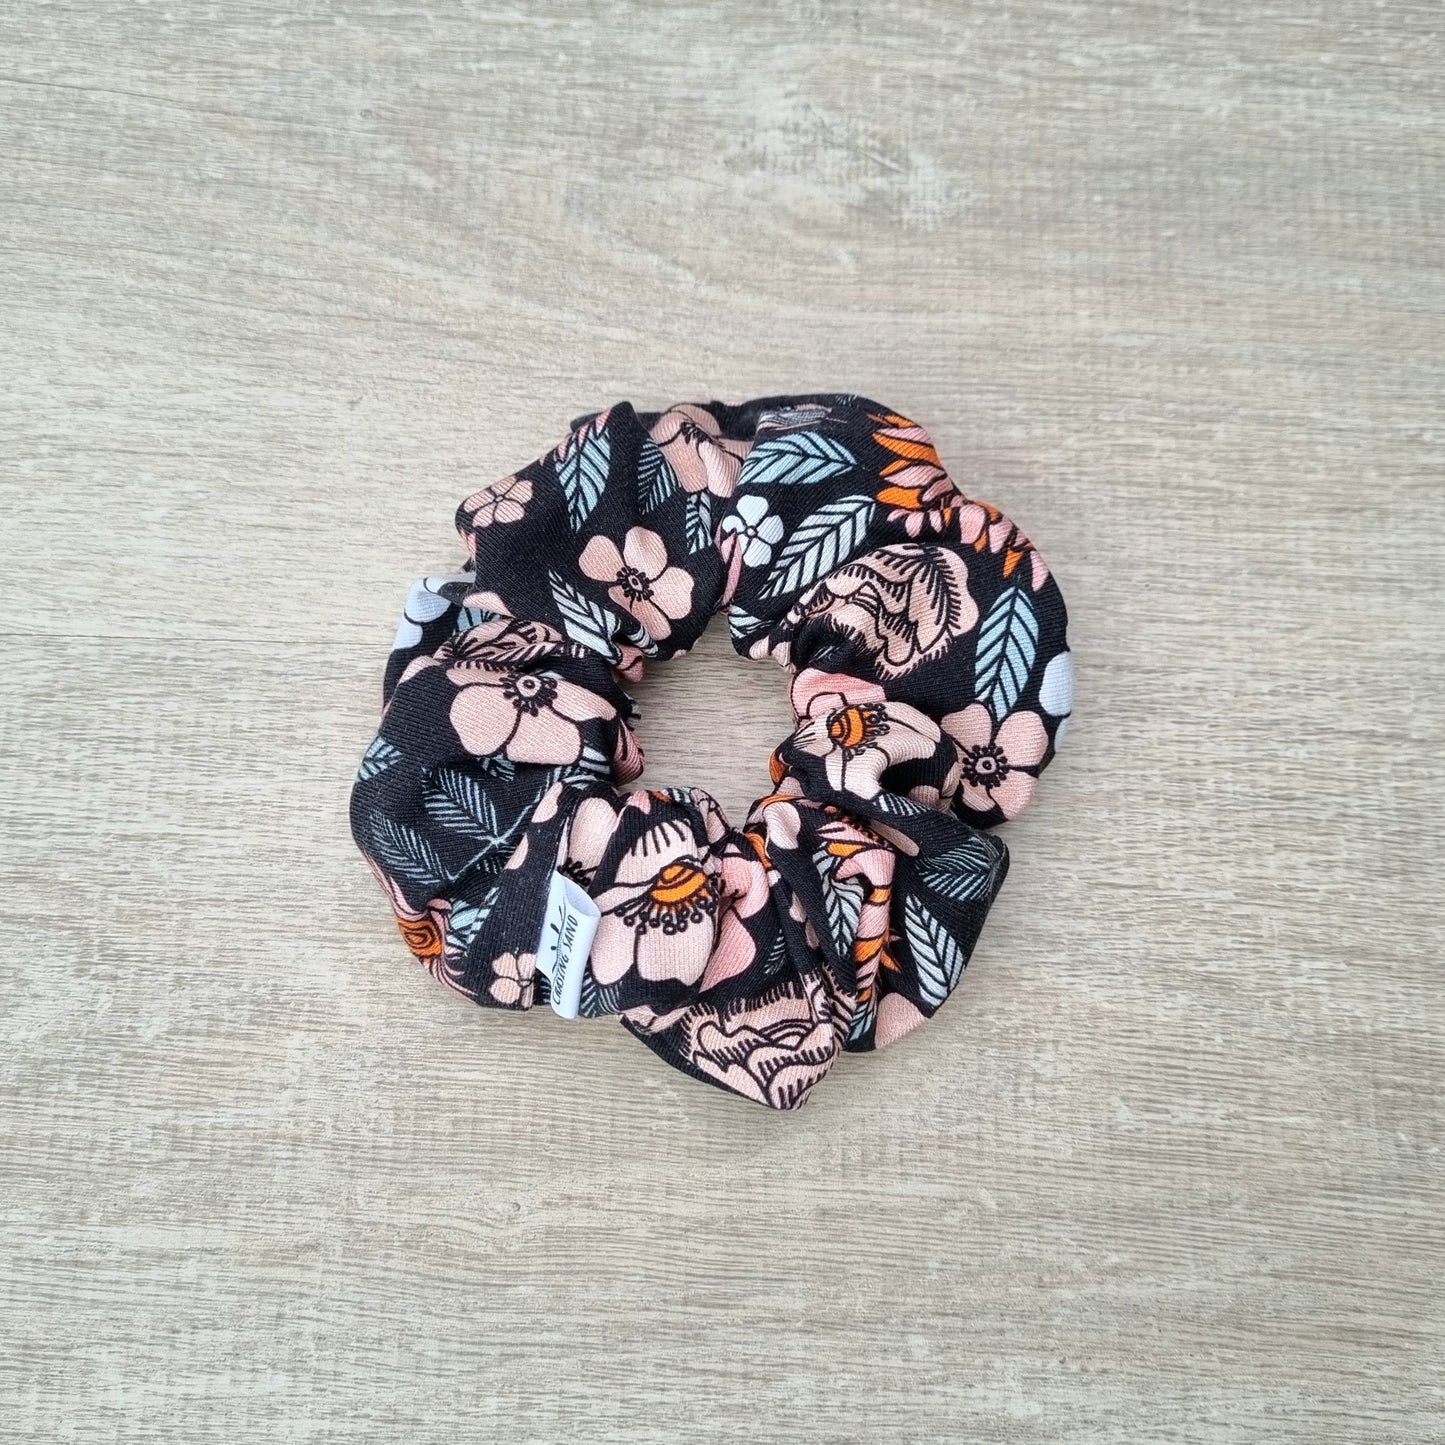 Scrunchie - Florence against wooden backdrop. Orange and pink flowers with leaves on black background.